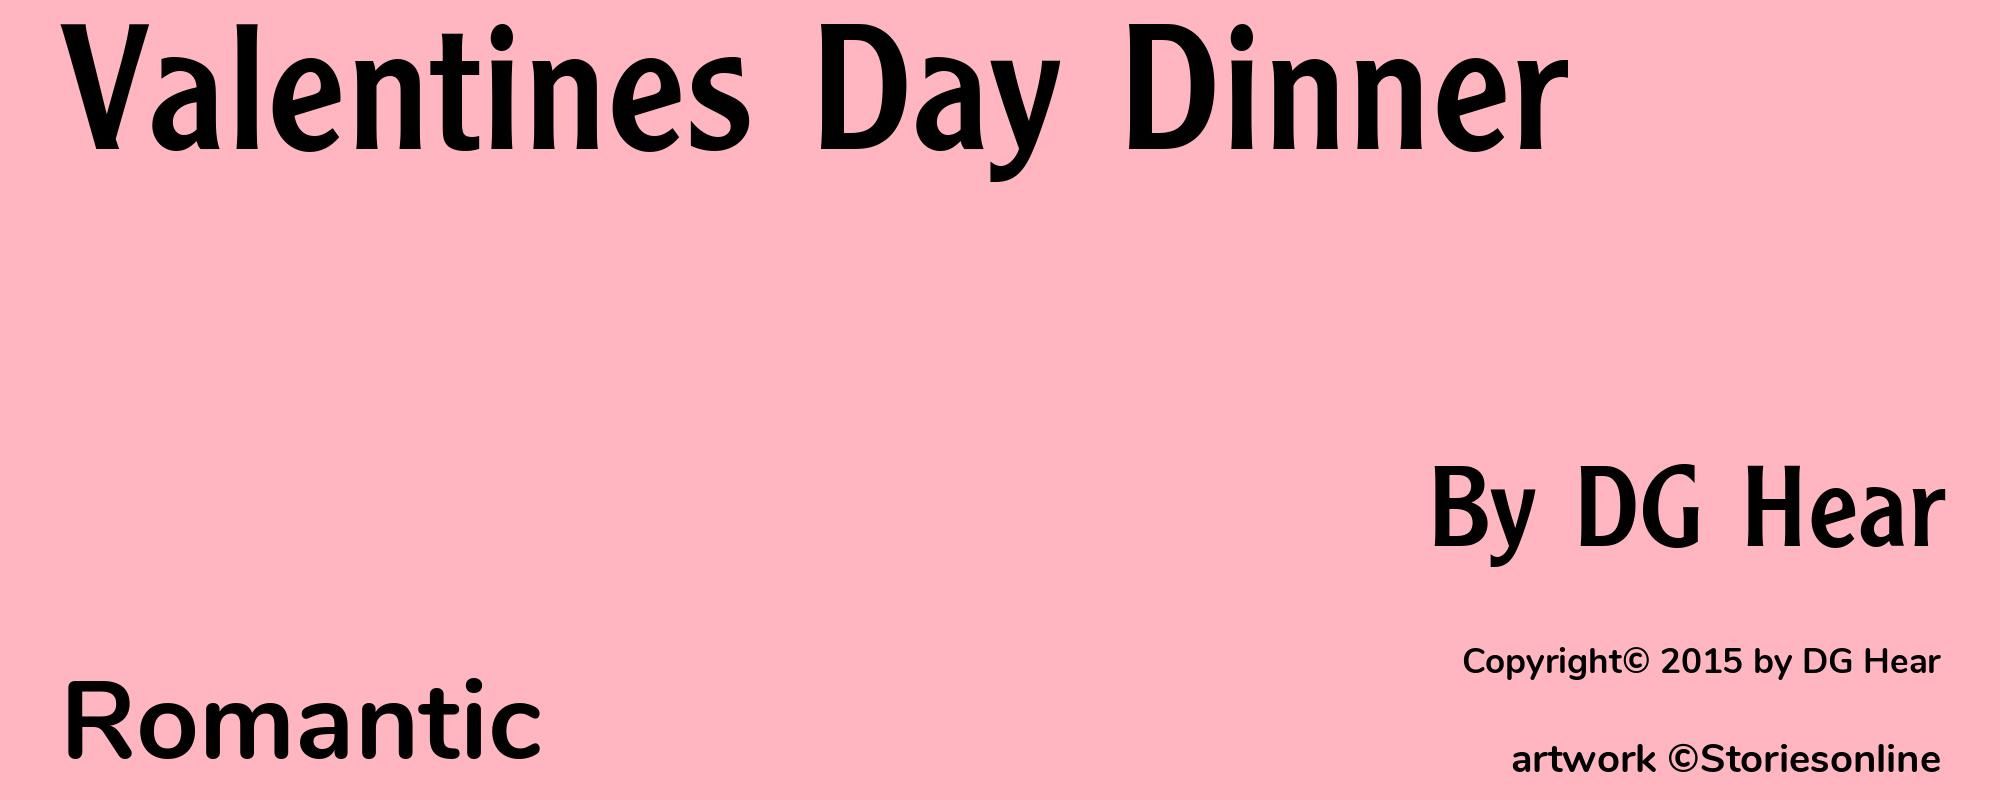 Valentines Day Dinner - Cover